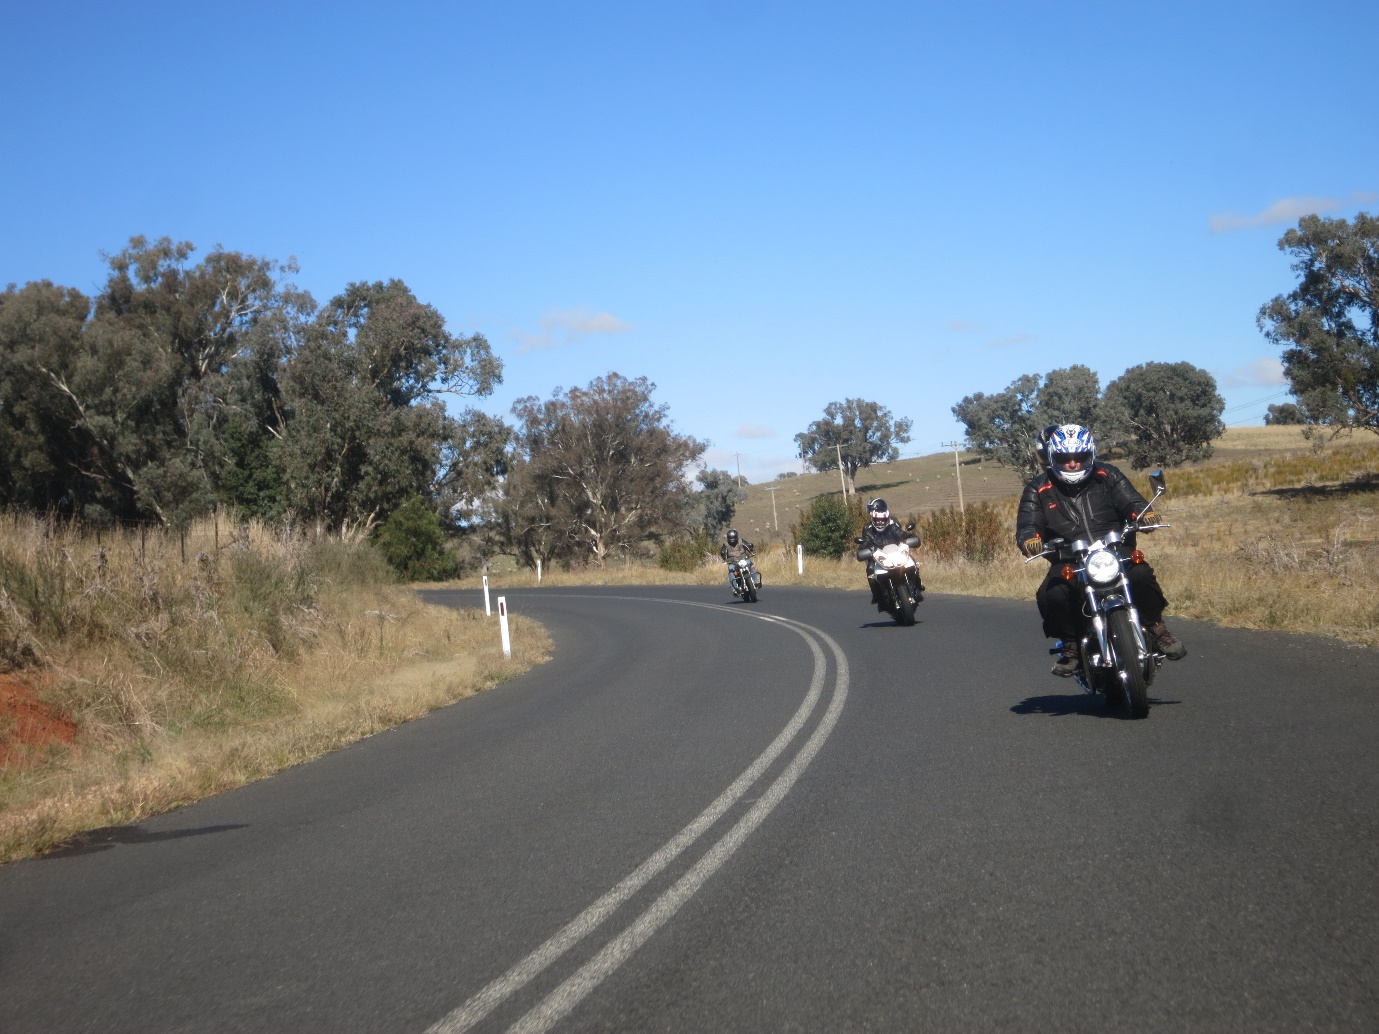 A group of people ride motorcycles down a road

Description automatically generated with medium confidence